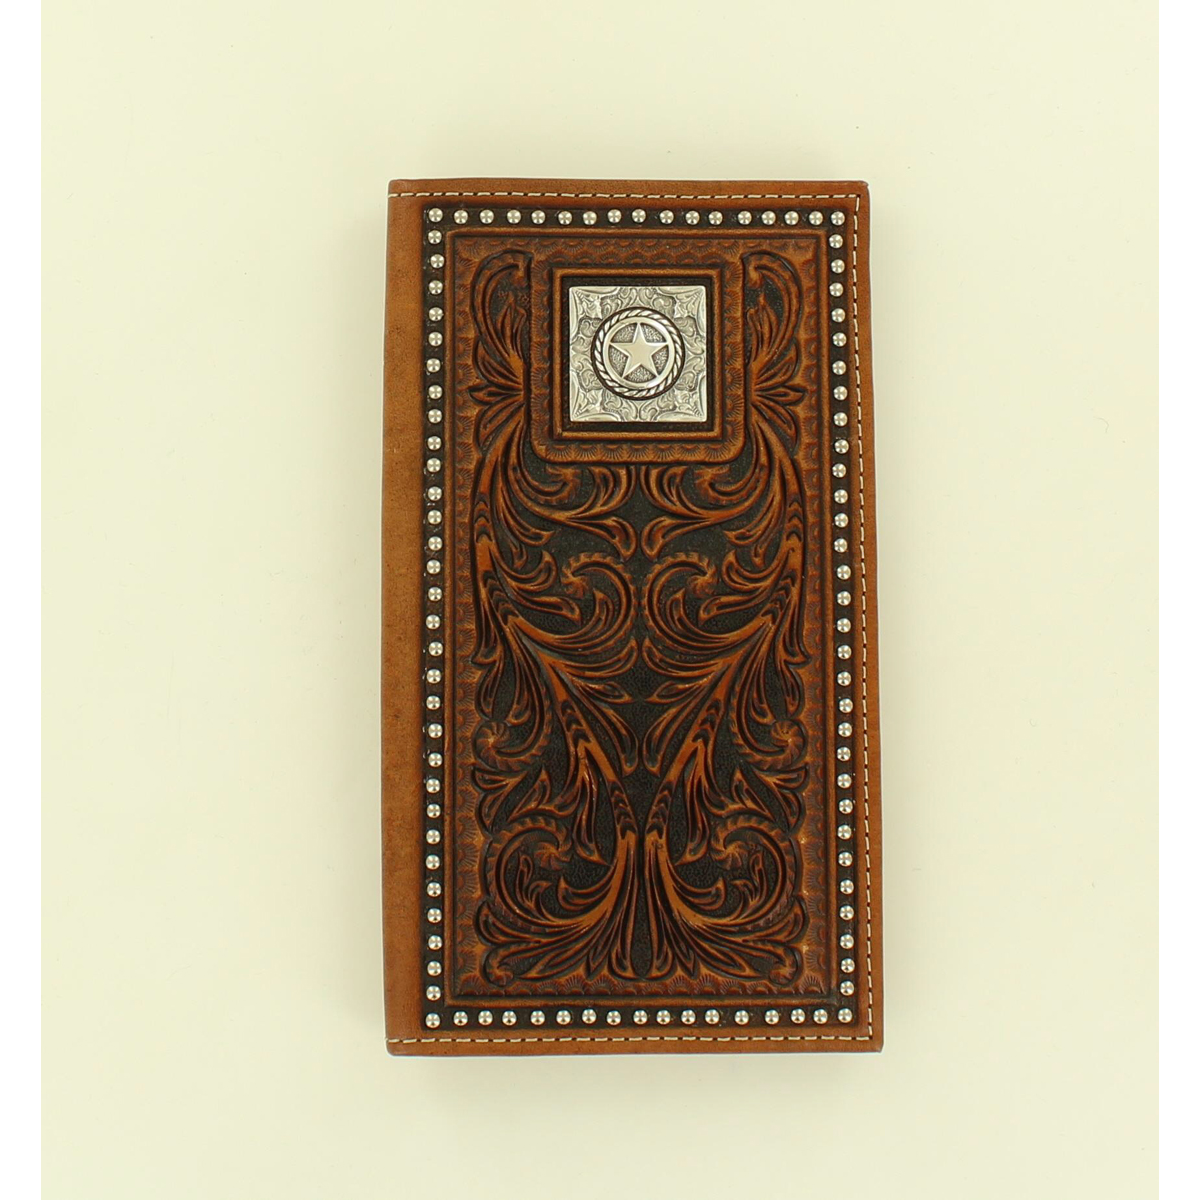 Nocona Men's Leather Rodeo Wallet - Brown Scroll Embossed w/Square Star Concho